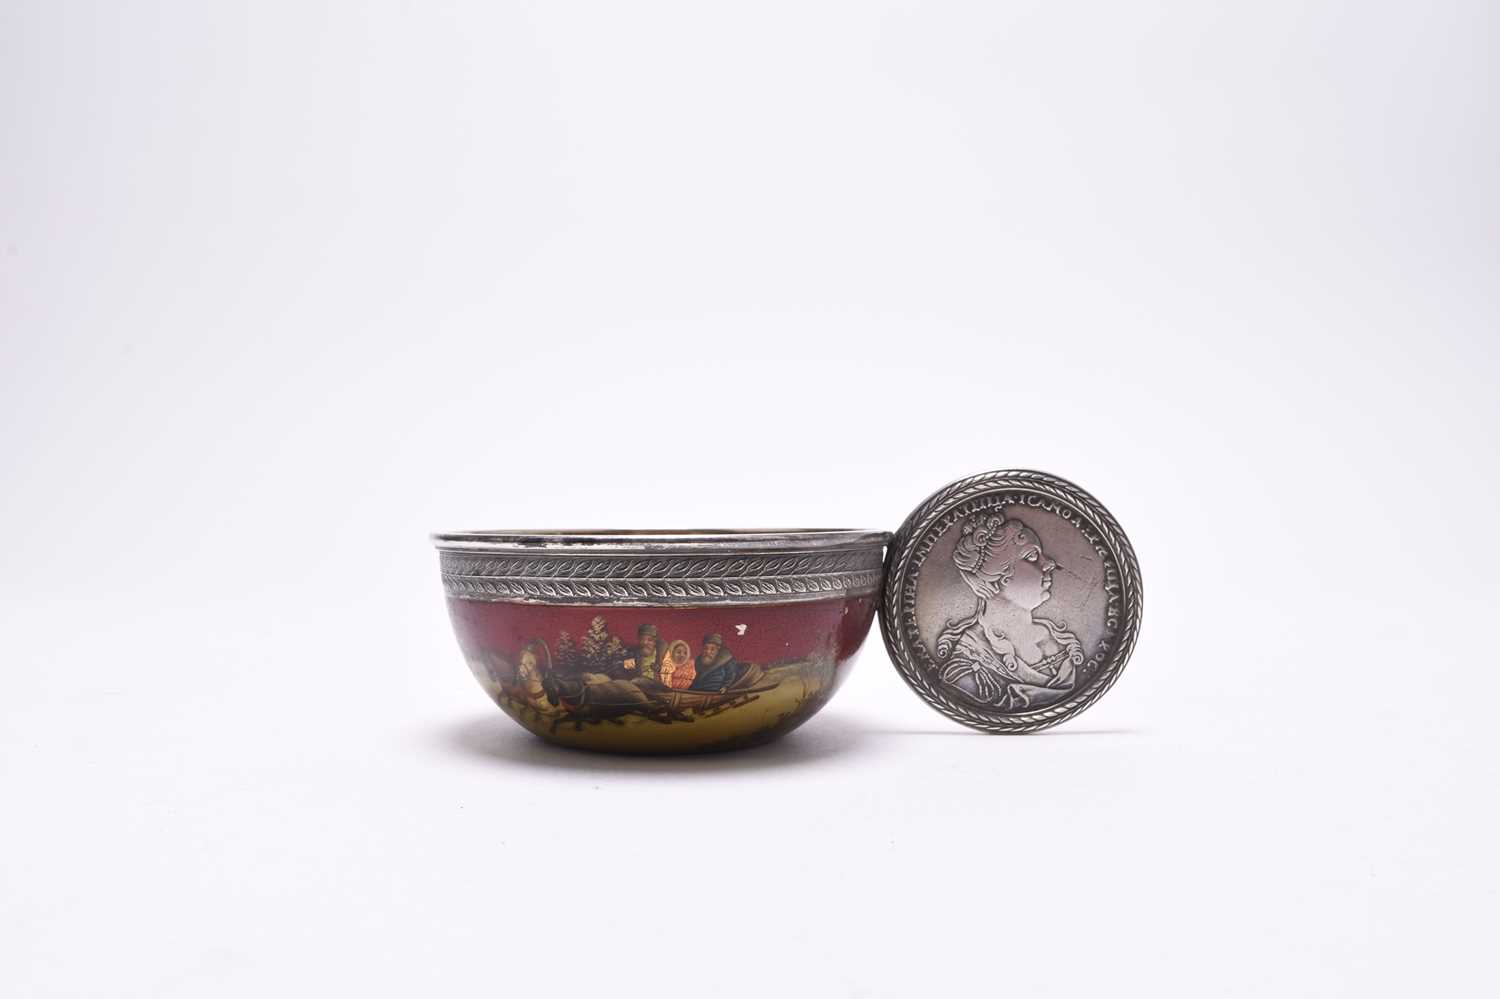 A Russian silver and enamel bowl